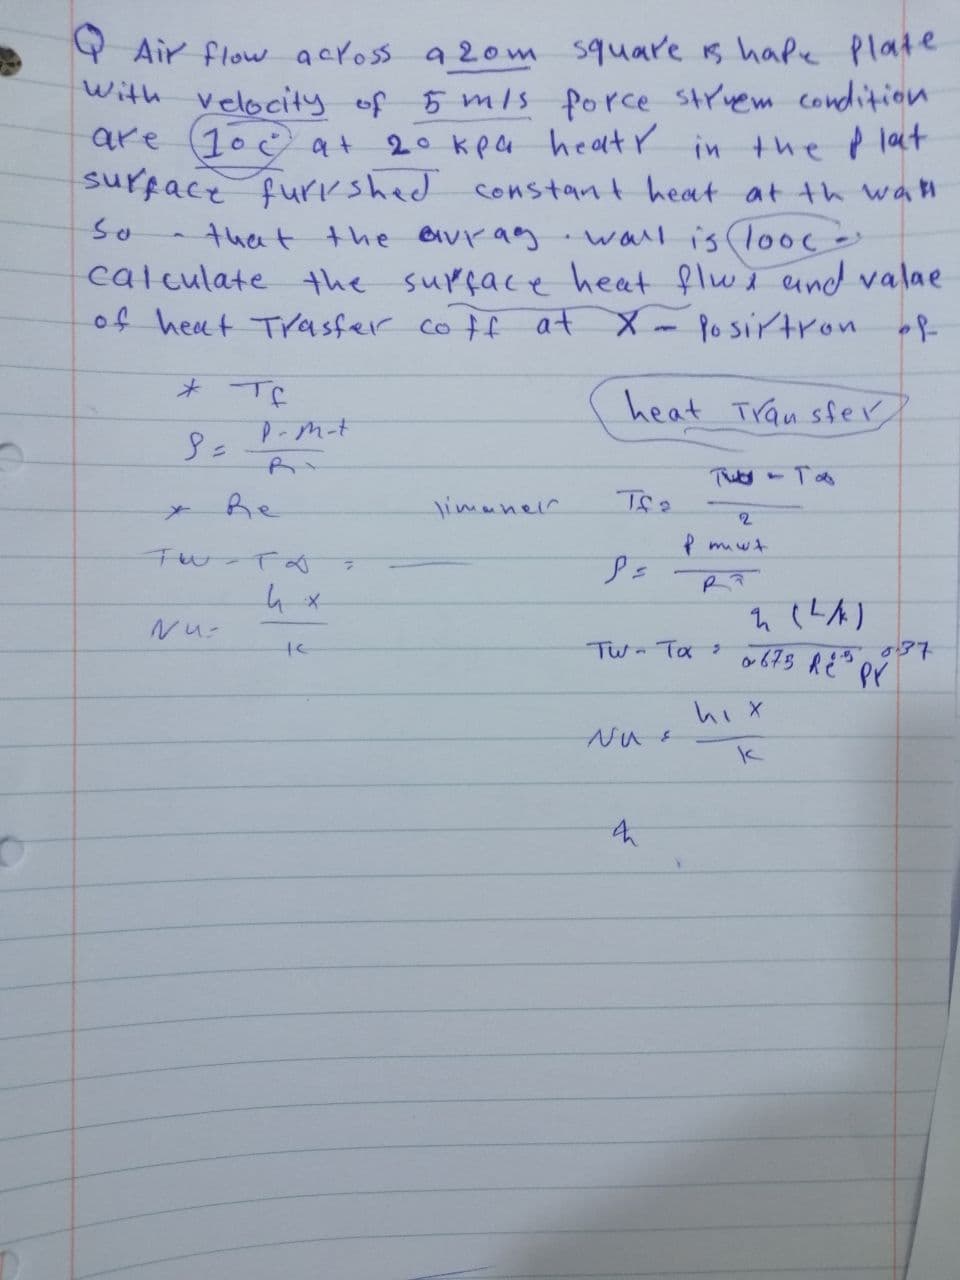 Air flow across a 20m square is hape plate
with velocity of 5 m/s force struem condition
are 10 at
2° kpa heaty in the plat
surface furkshed constant heat at the wall
that the avrag wall is lood -
calculate the surface heat flux and valae
of heat Trasfer coff at X-Posirtron of
So
* те
P-m-t
Nu-
Re
Fw-To
te
7
timaneir
heat Transfer
тися - тов
Tfa
P=
2
P mut
PP
TW - Tax >
Nu &
q (LA)
0673 RE PY
hix
k
037